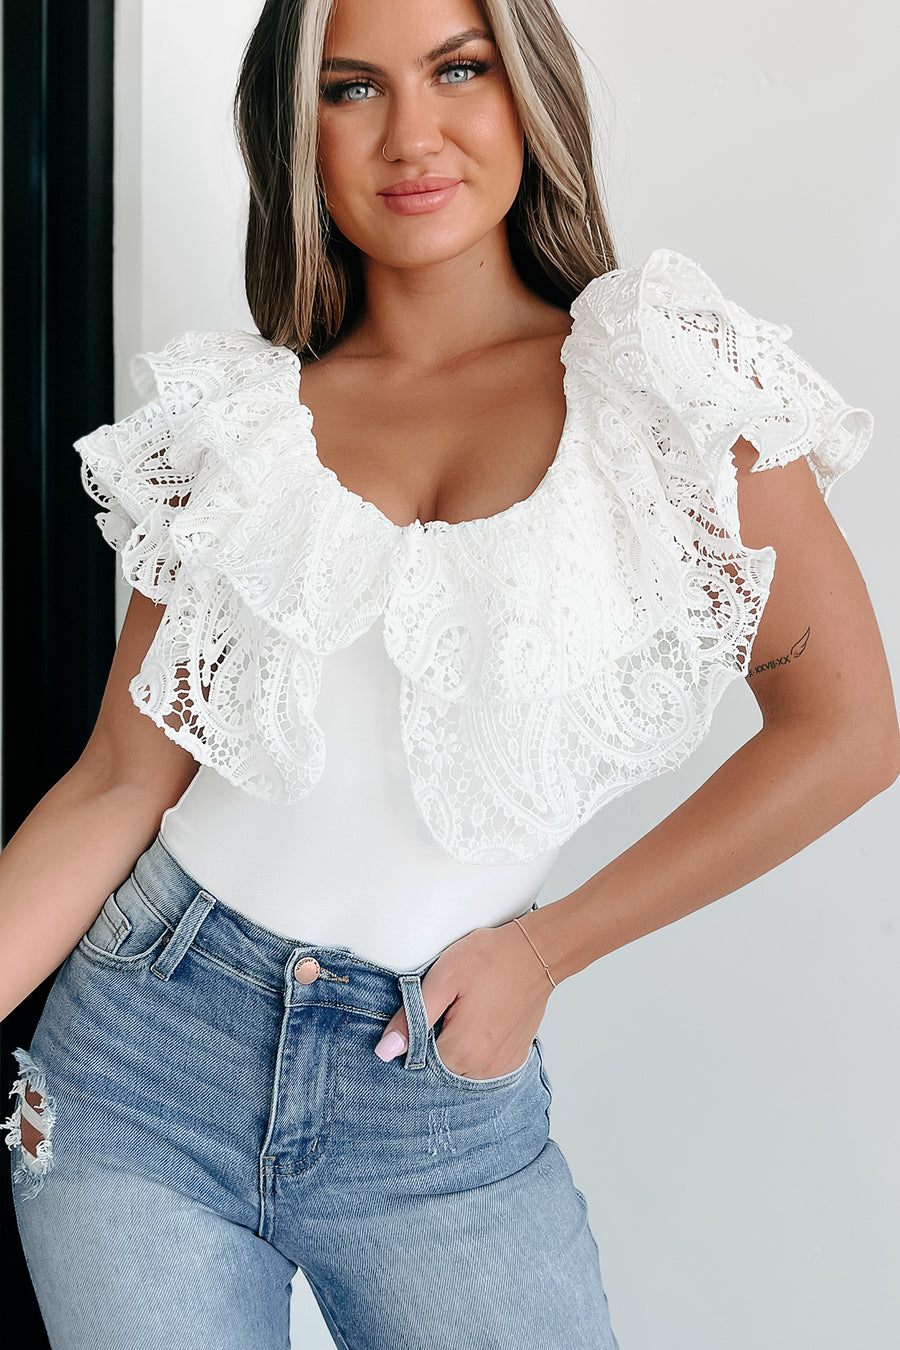 Too Much To Handle Lace Bodysuit (Royal) · NanaMacs